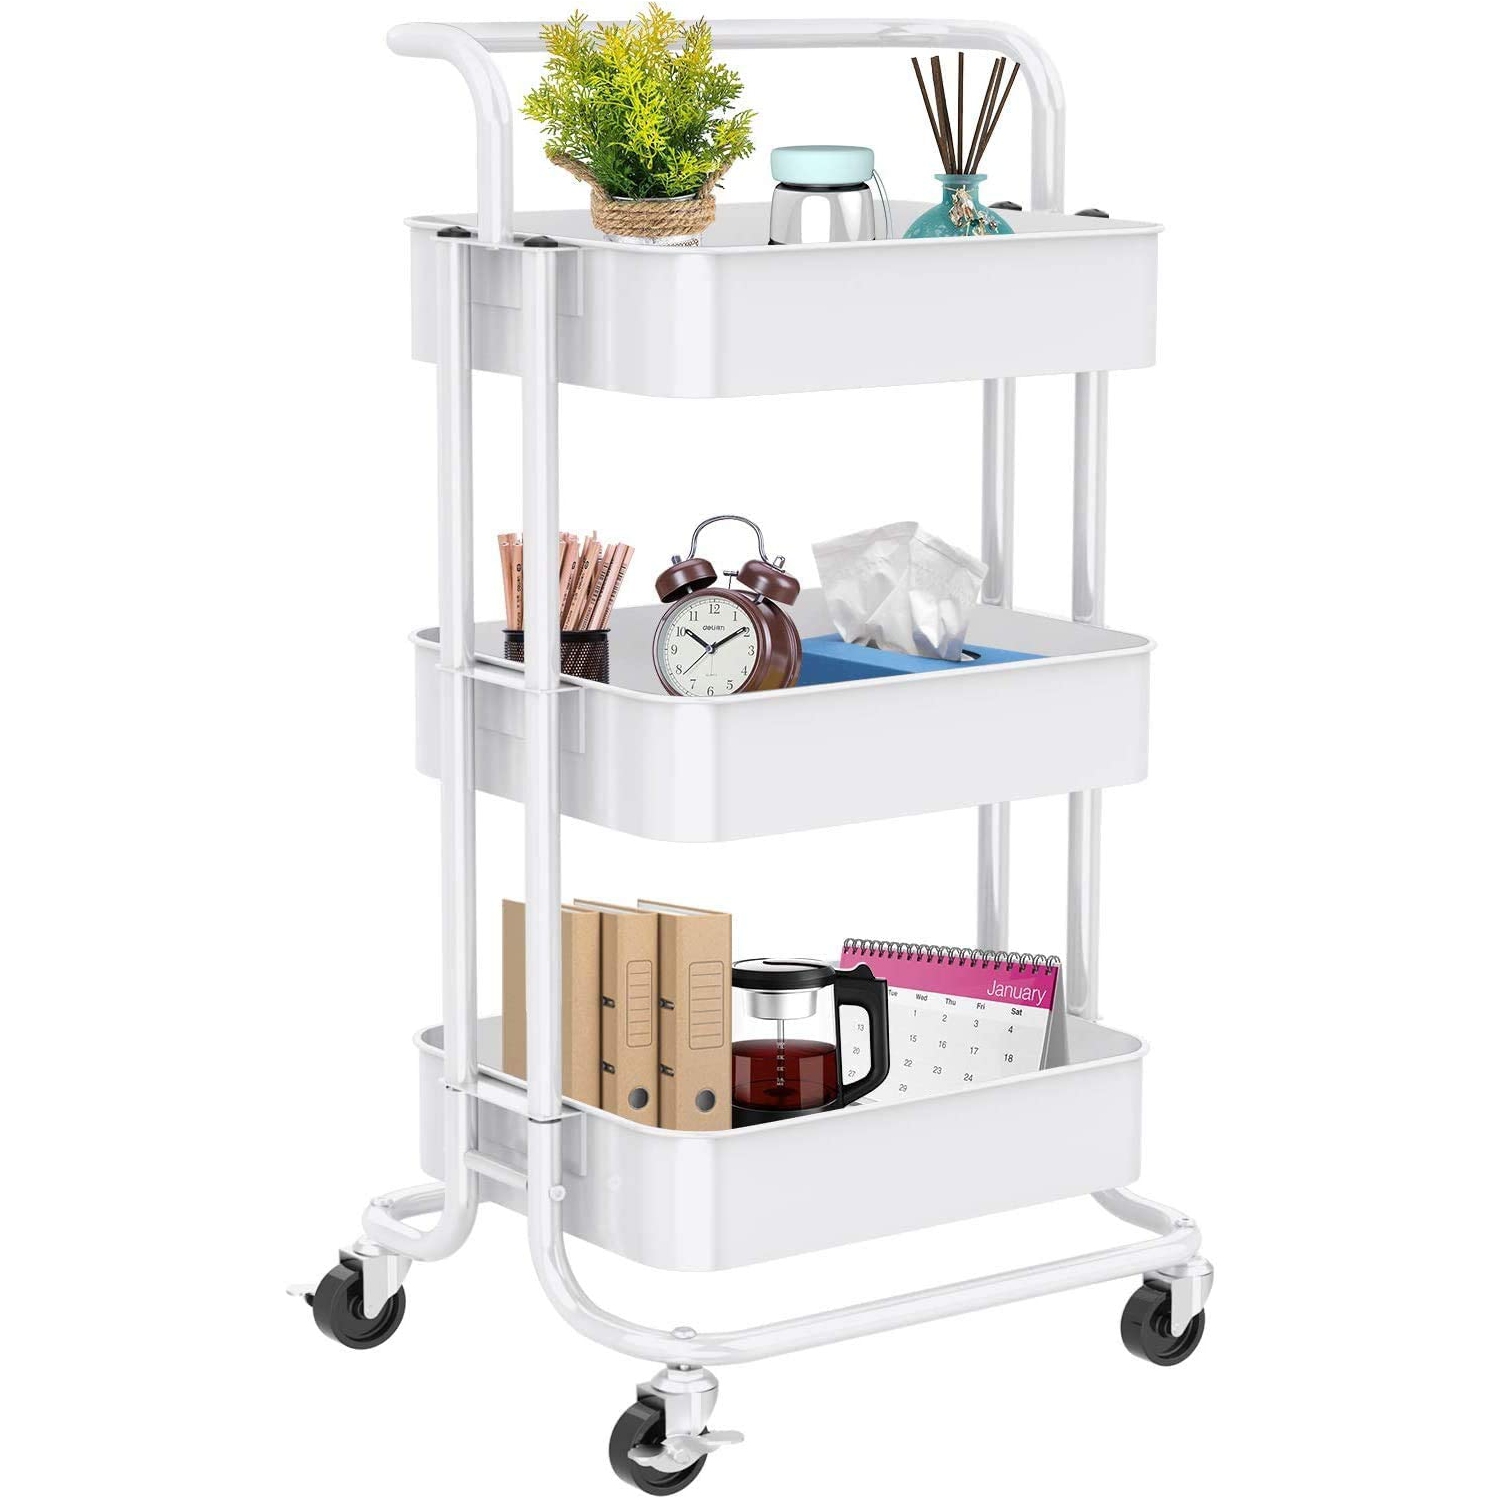 Rolling Cart Metal Utility Cart 3-Tier Storage Trolley with Extra Storage Accessories and 2 Lockable wheels Ideal for Bedroom Kitchen Garage Office Crafts,Green 